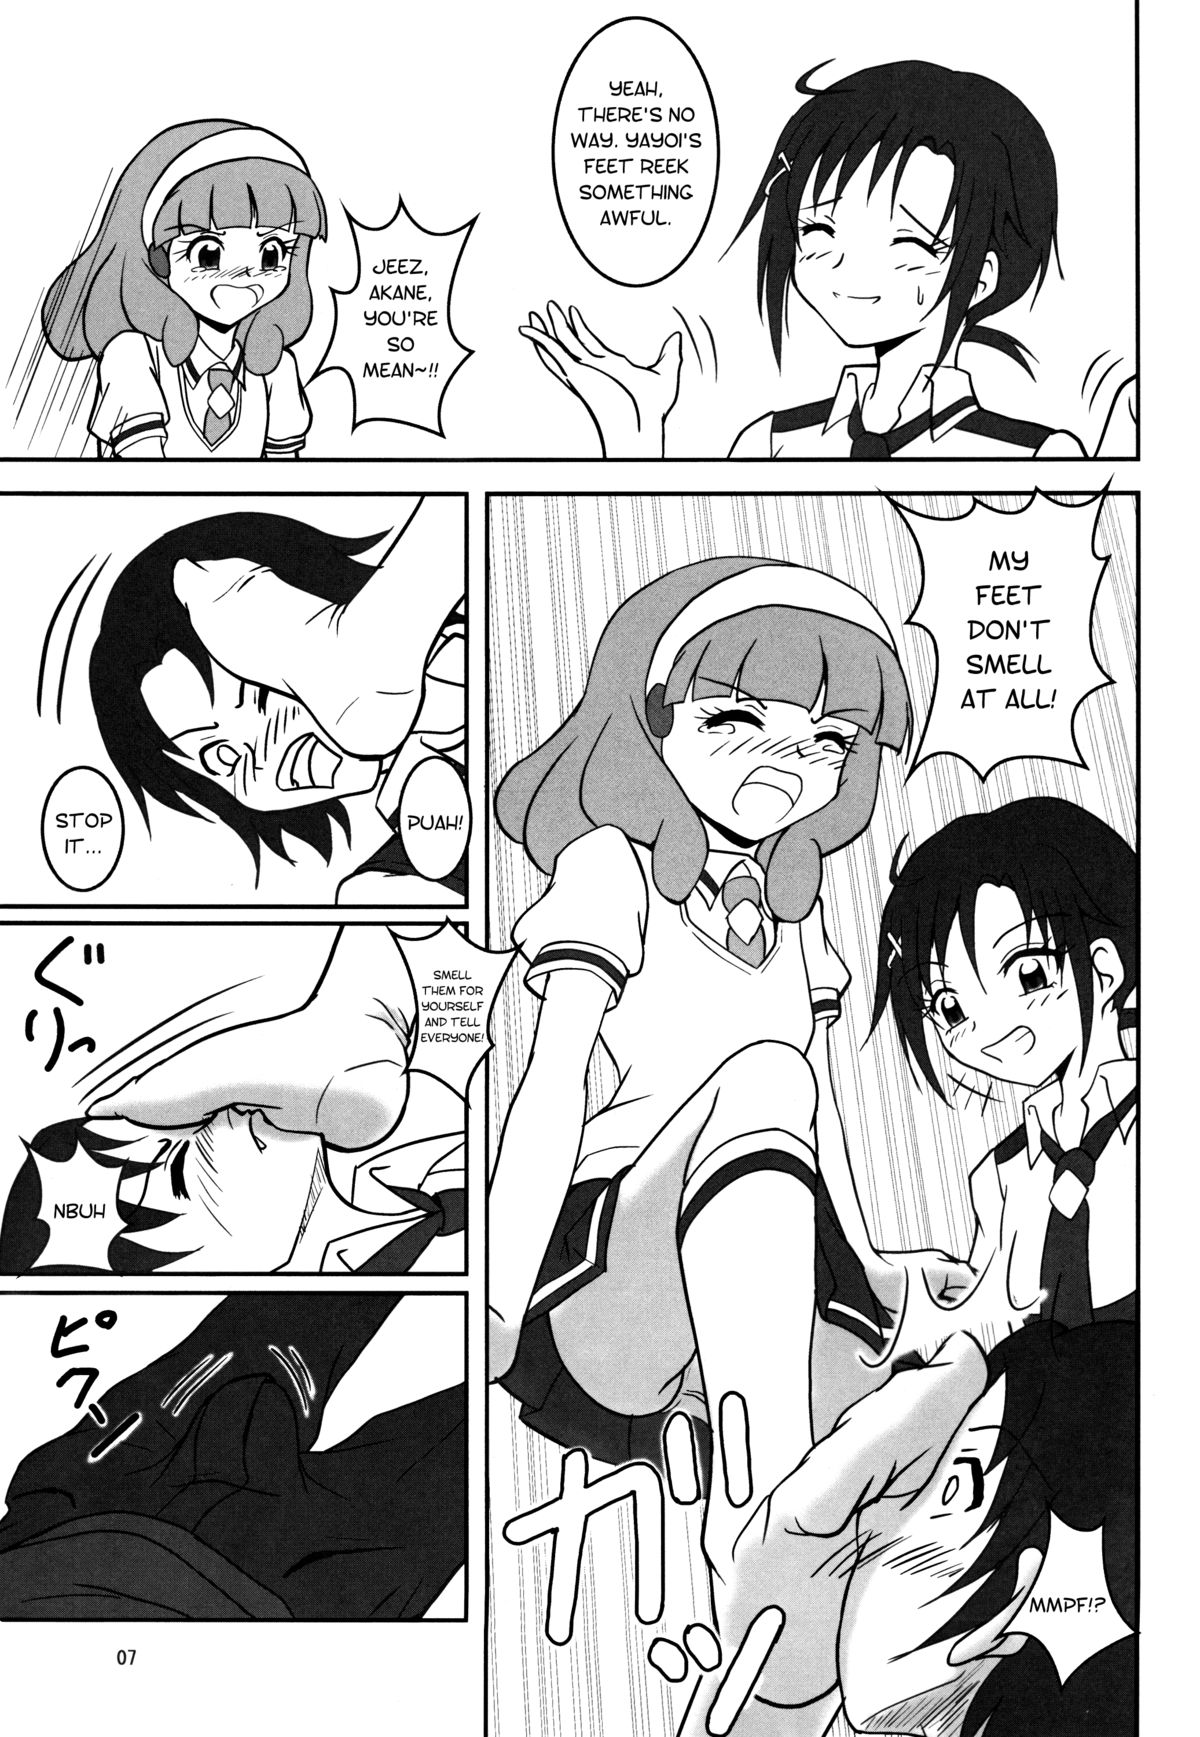 (C82) [AFJ (Ashi_O)] Smell Zuricure | Smell Footycure (Smile Precure!) [English] page 8 full